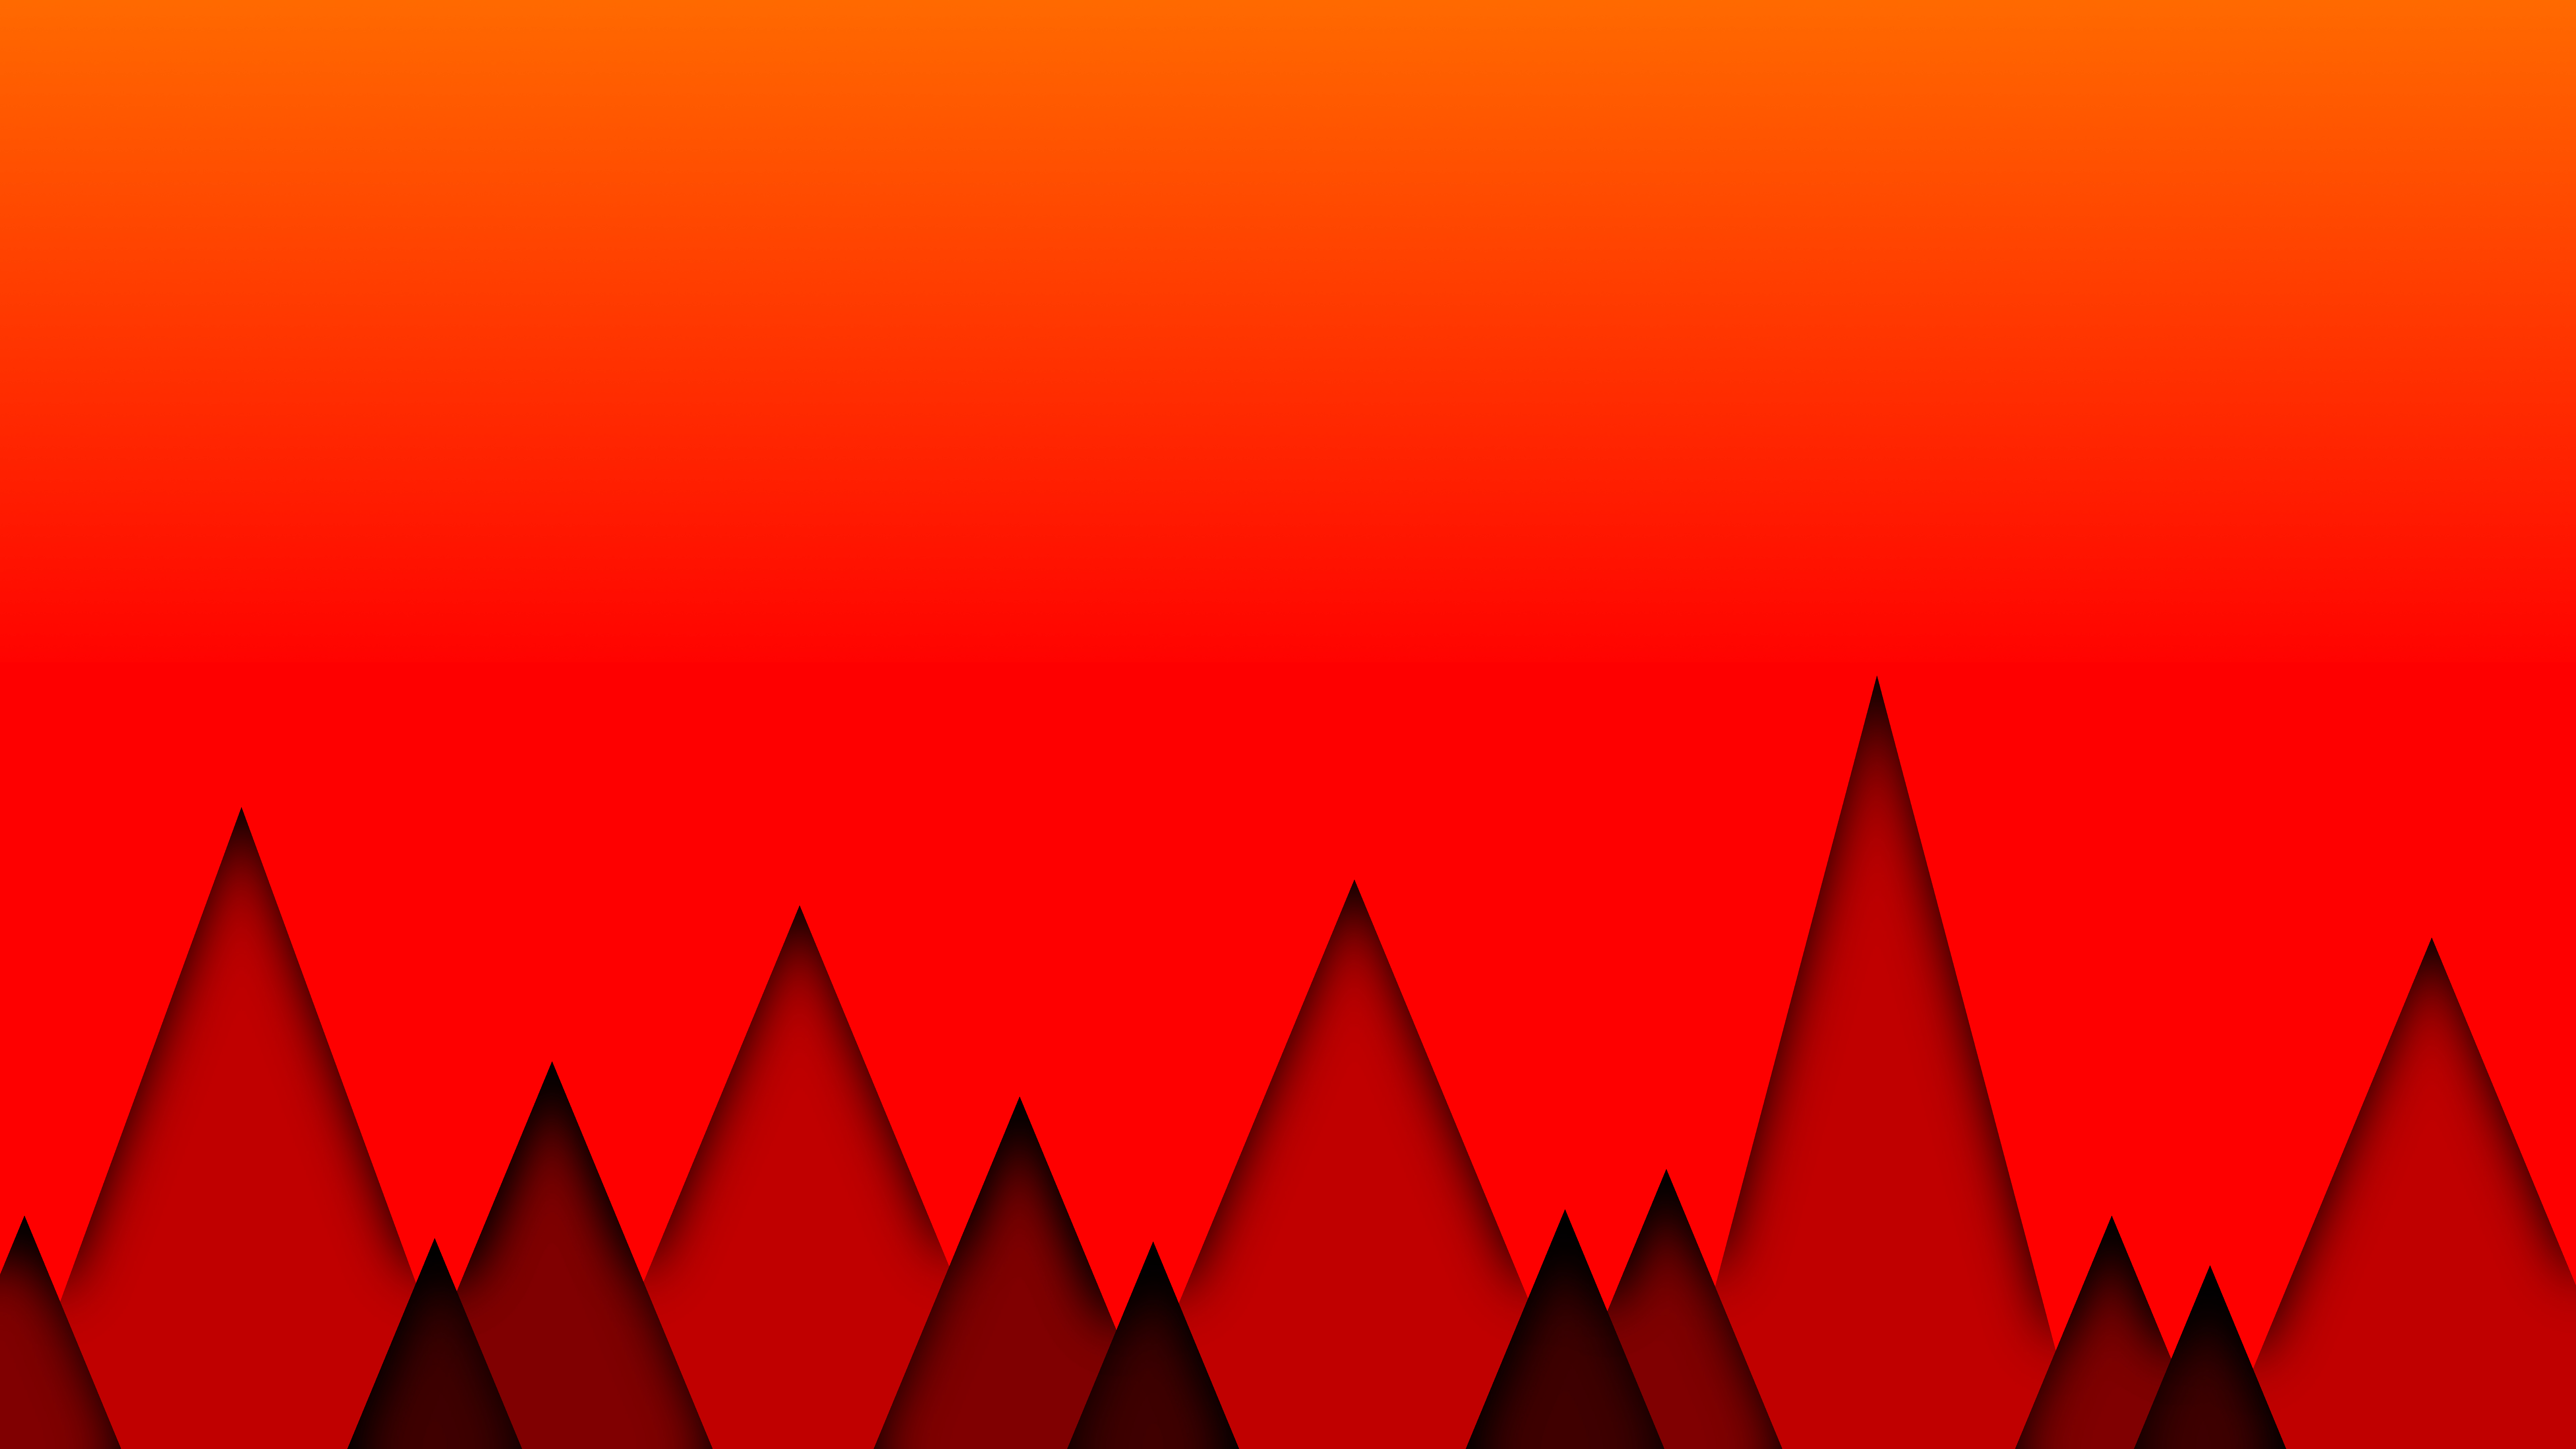 Wallpaper Triangles, Geometric, Red, Bright - Illustration , HD Wallpaper & Backgrounds